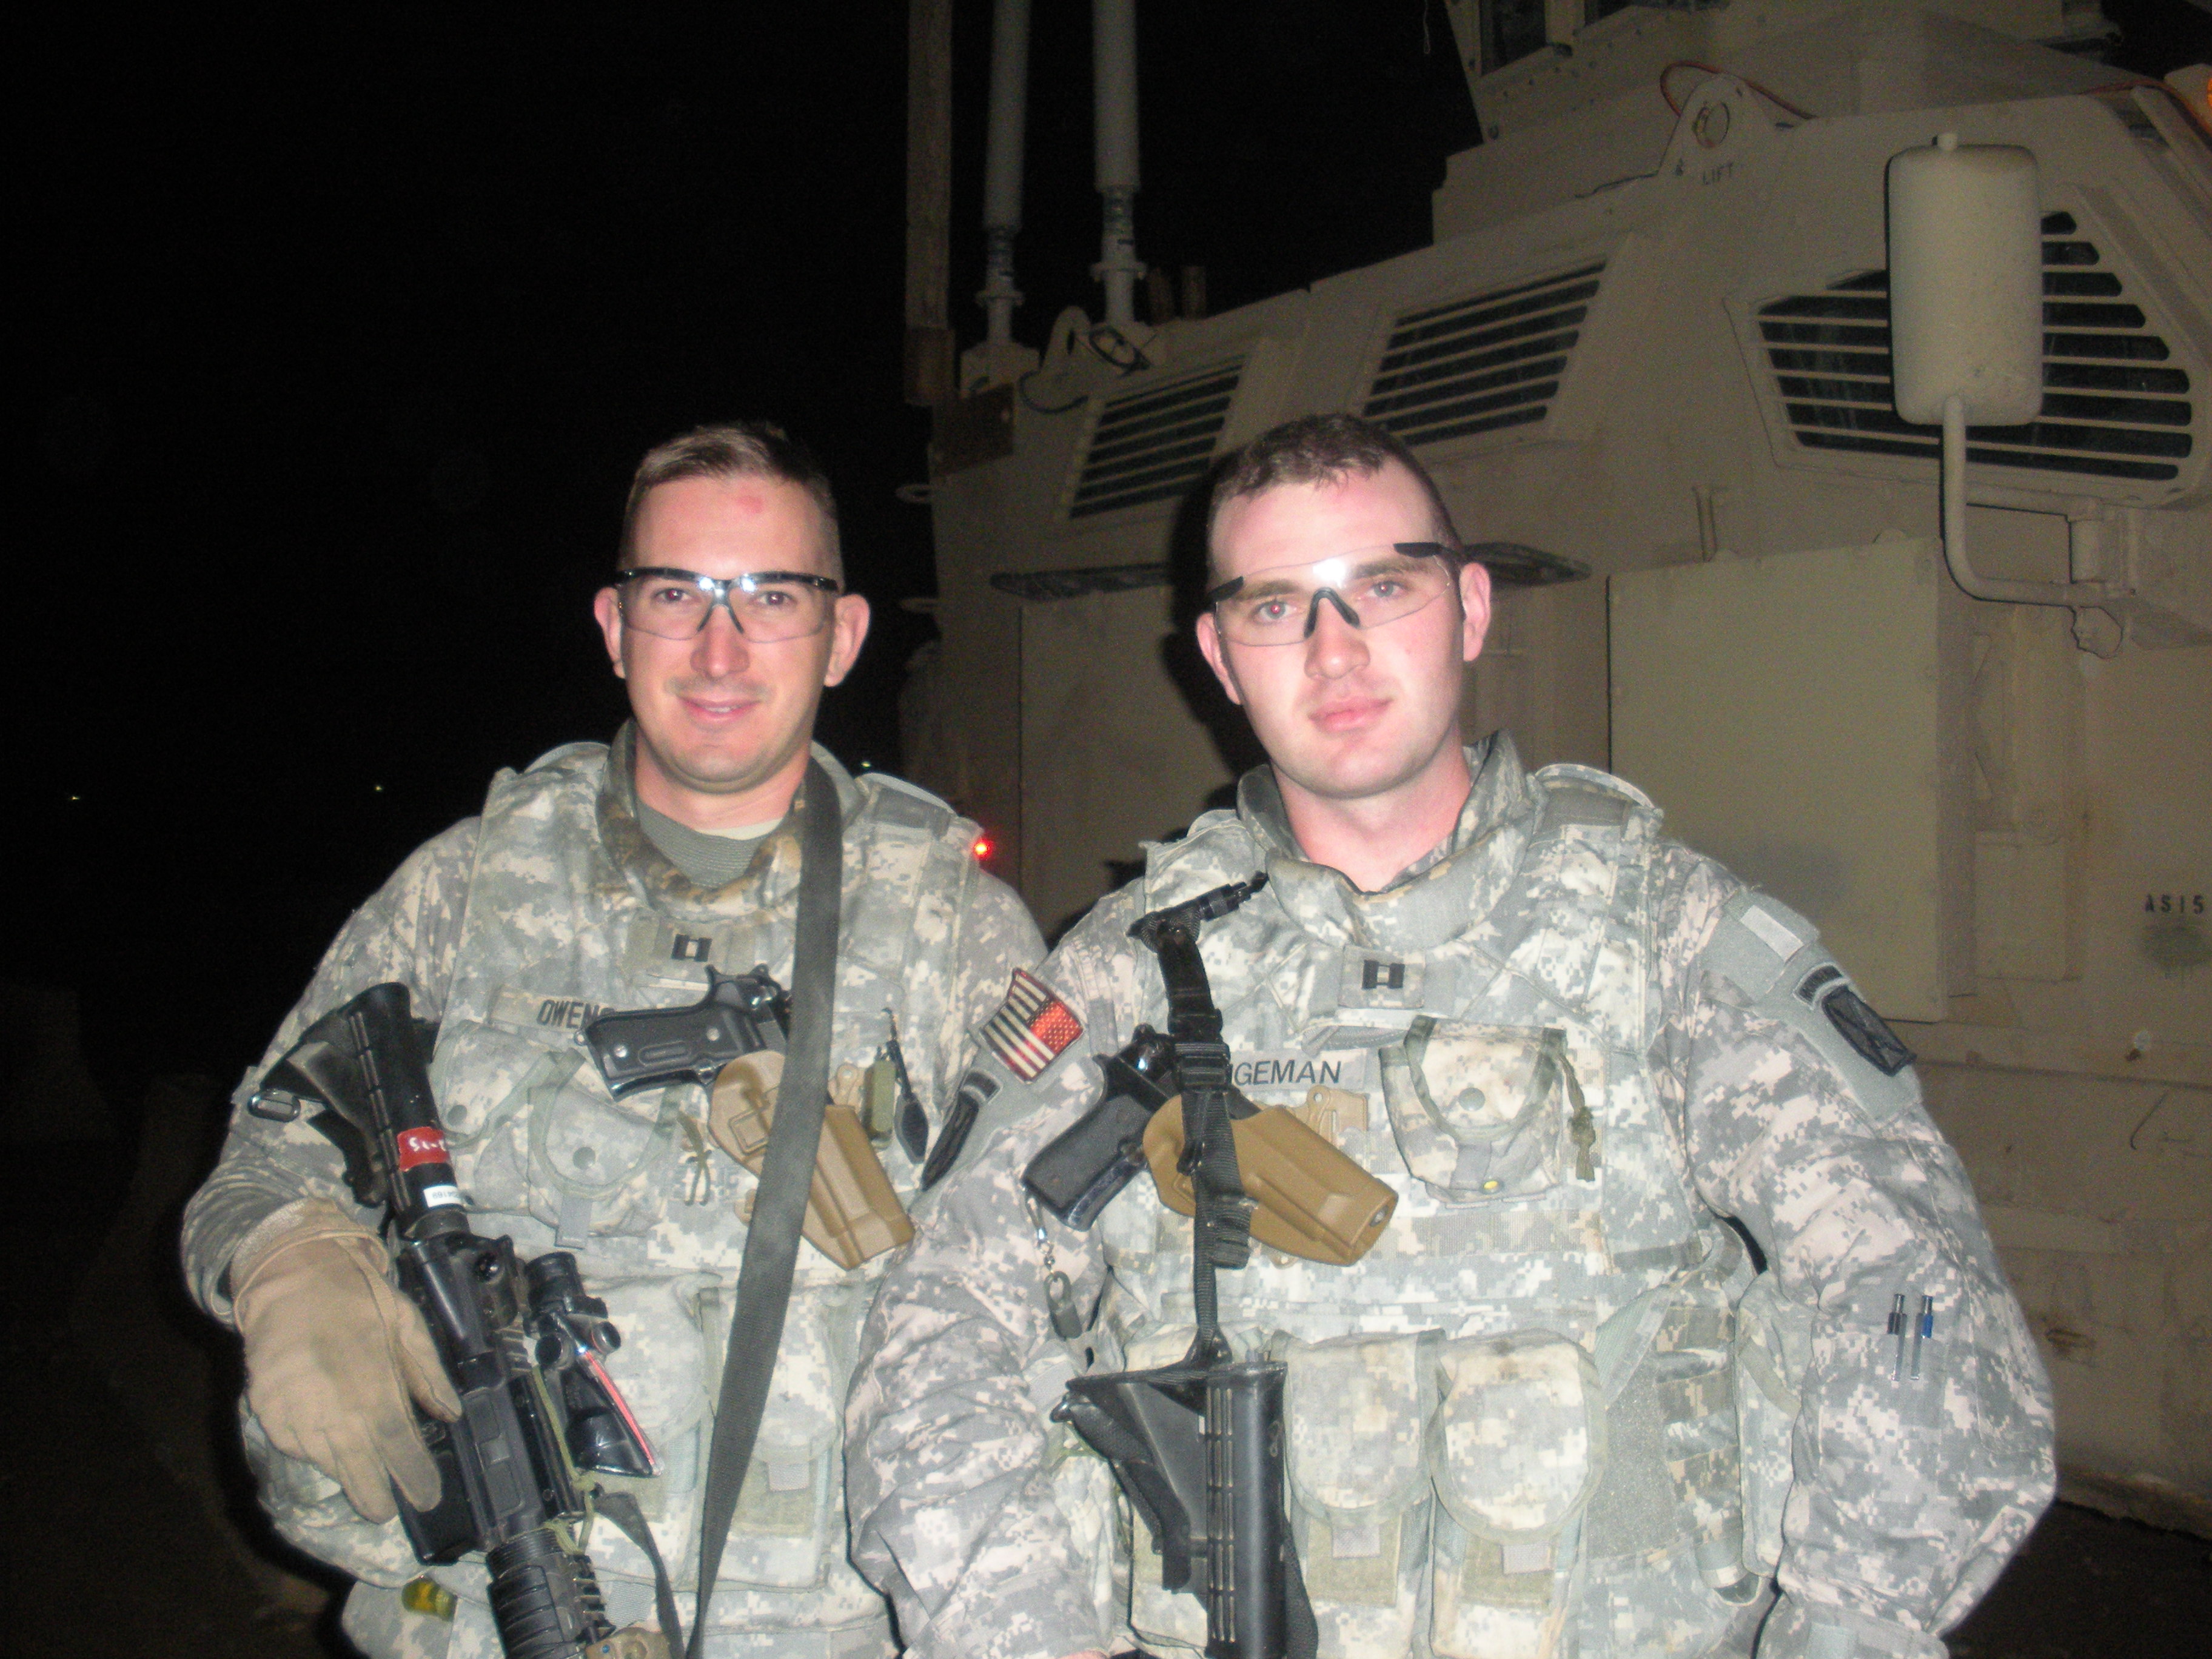 Capt. Timothy Owens, U.S. Army, (left) Virginia Tech Corps of Cadets Class of 2004